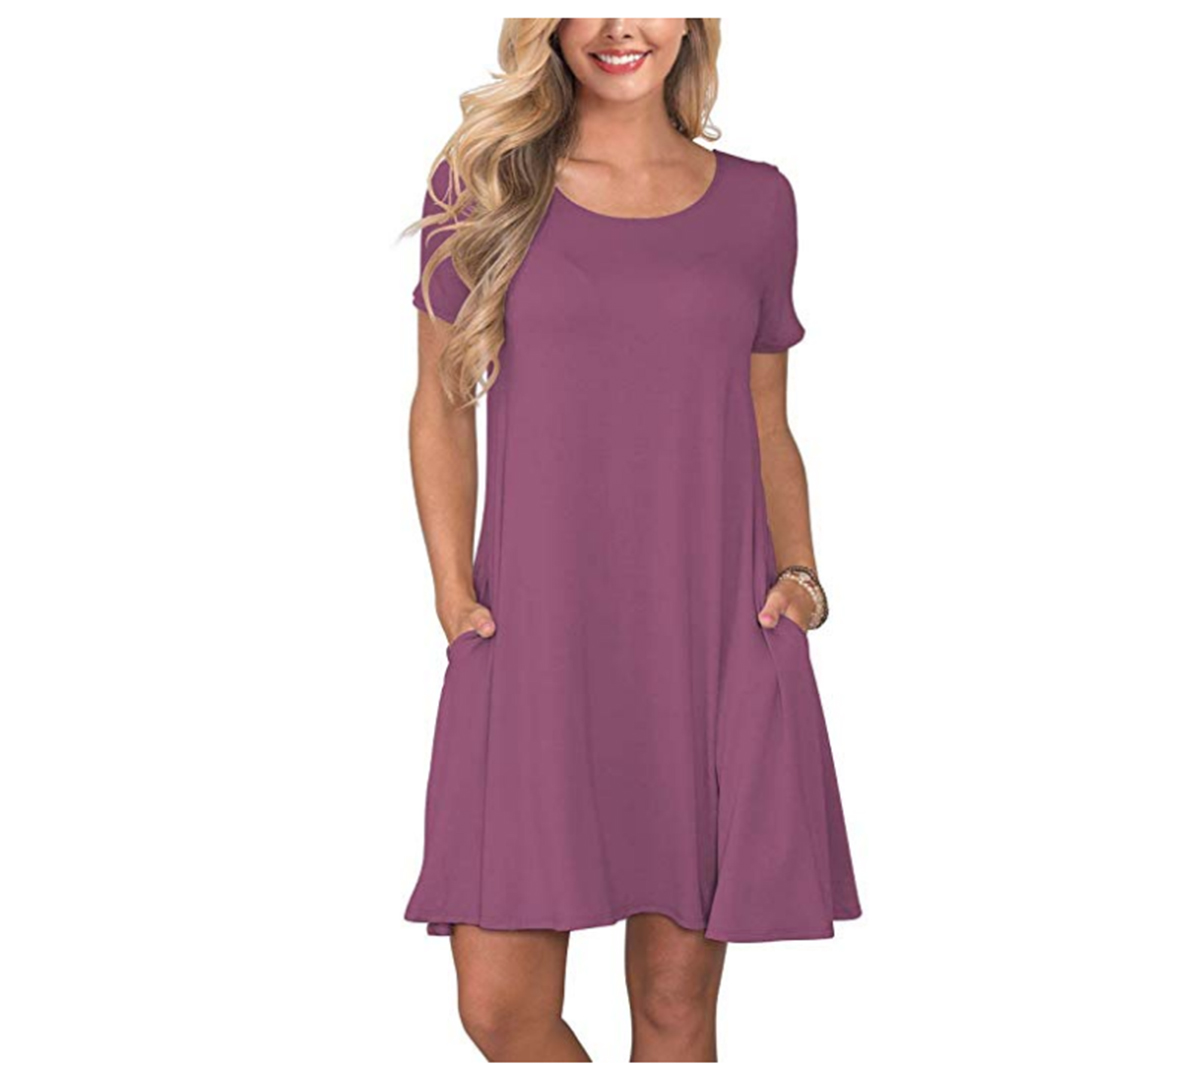 This Casual T-Shirt Dress With Pockets Has Over 1,200 Glowing Reviews ...